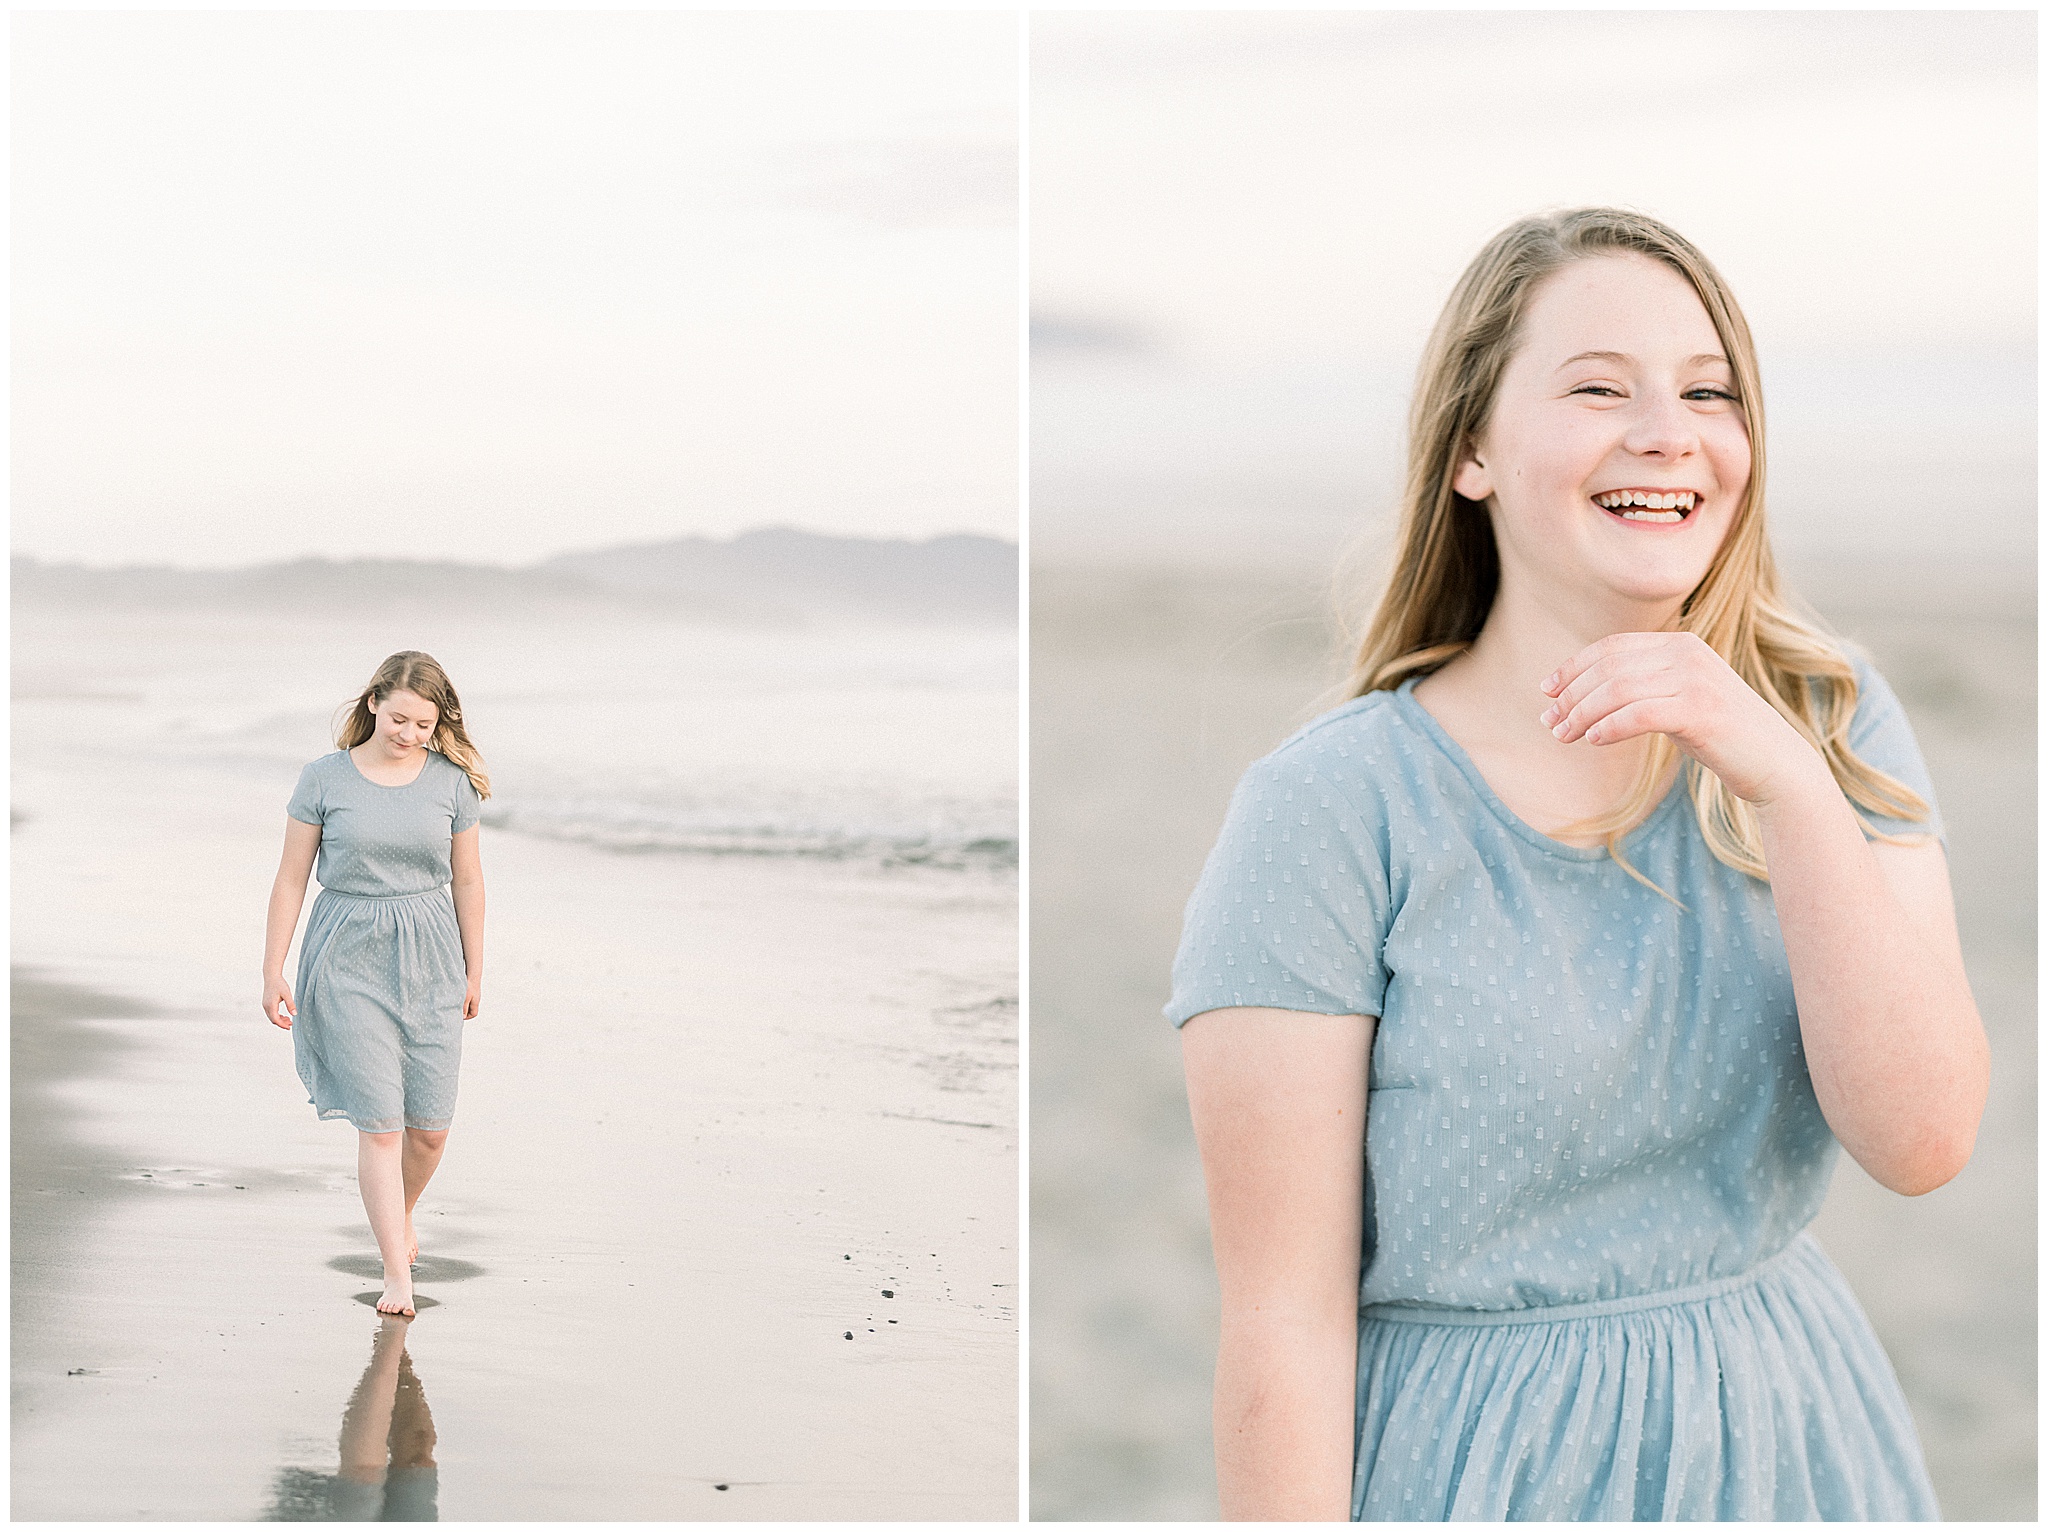 15 year old portraits of teenage girl in a blue dress